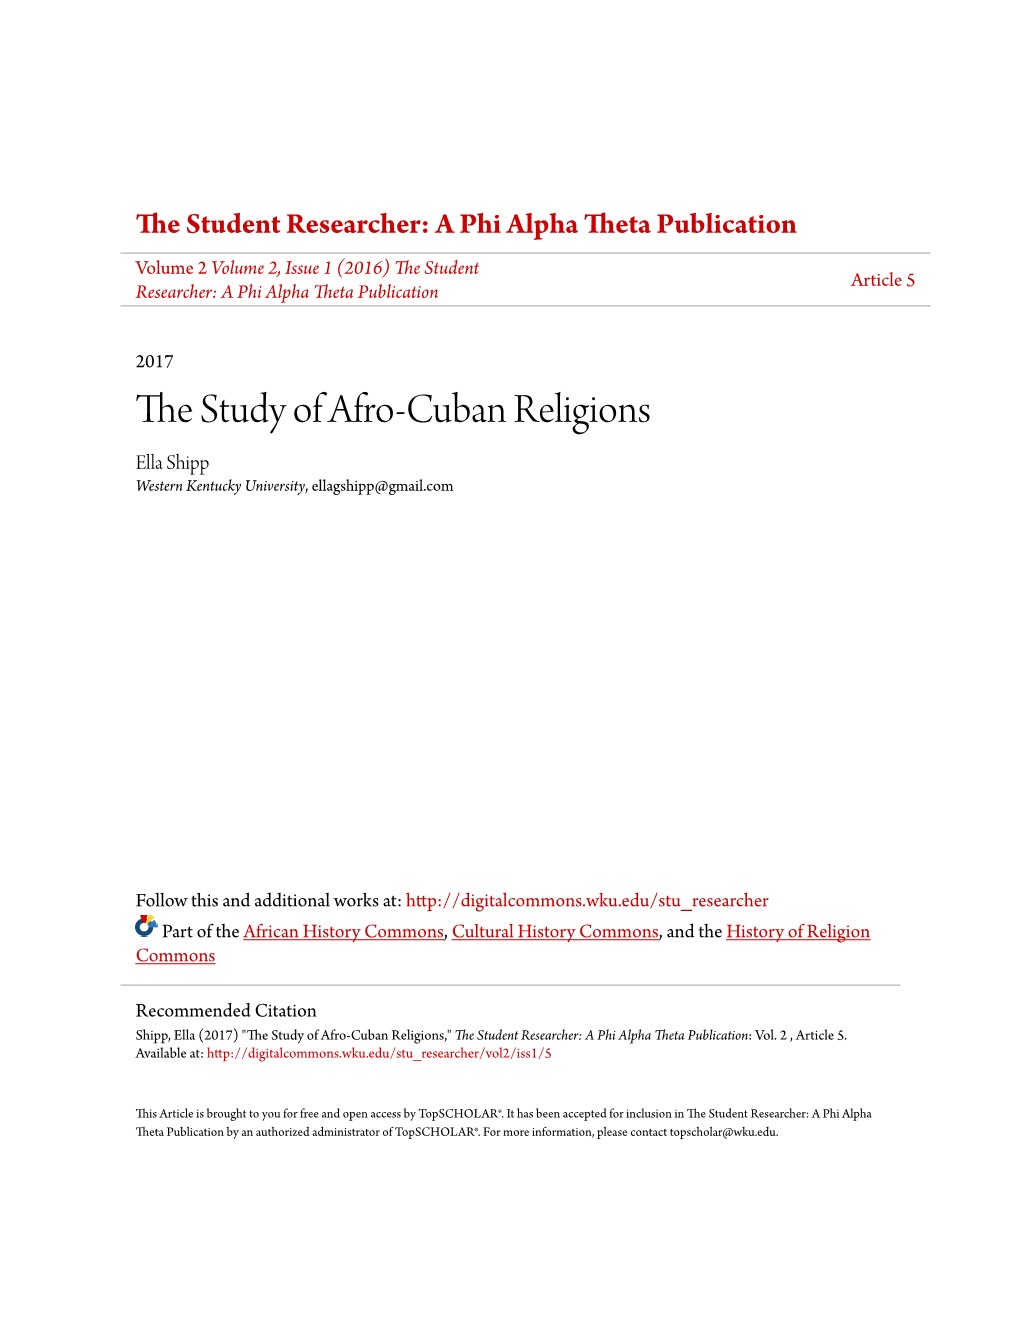 The Study of Afro-Cuban Religions